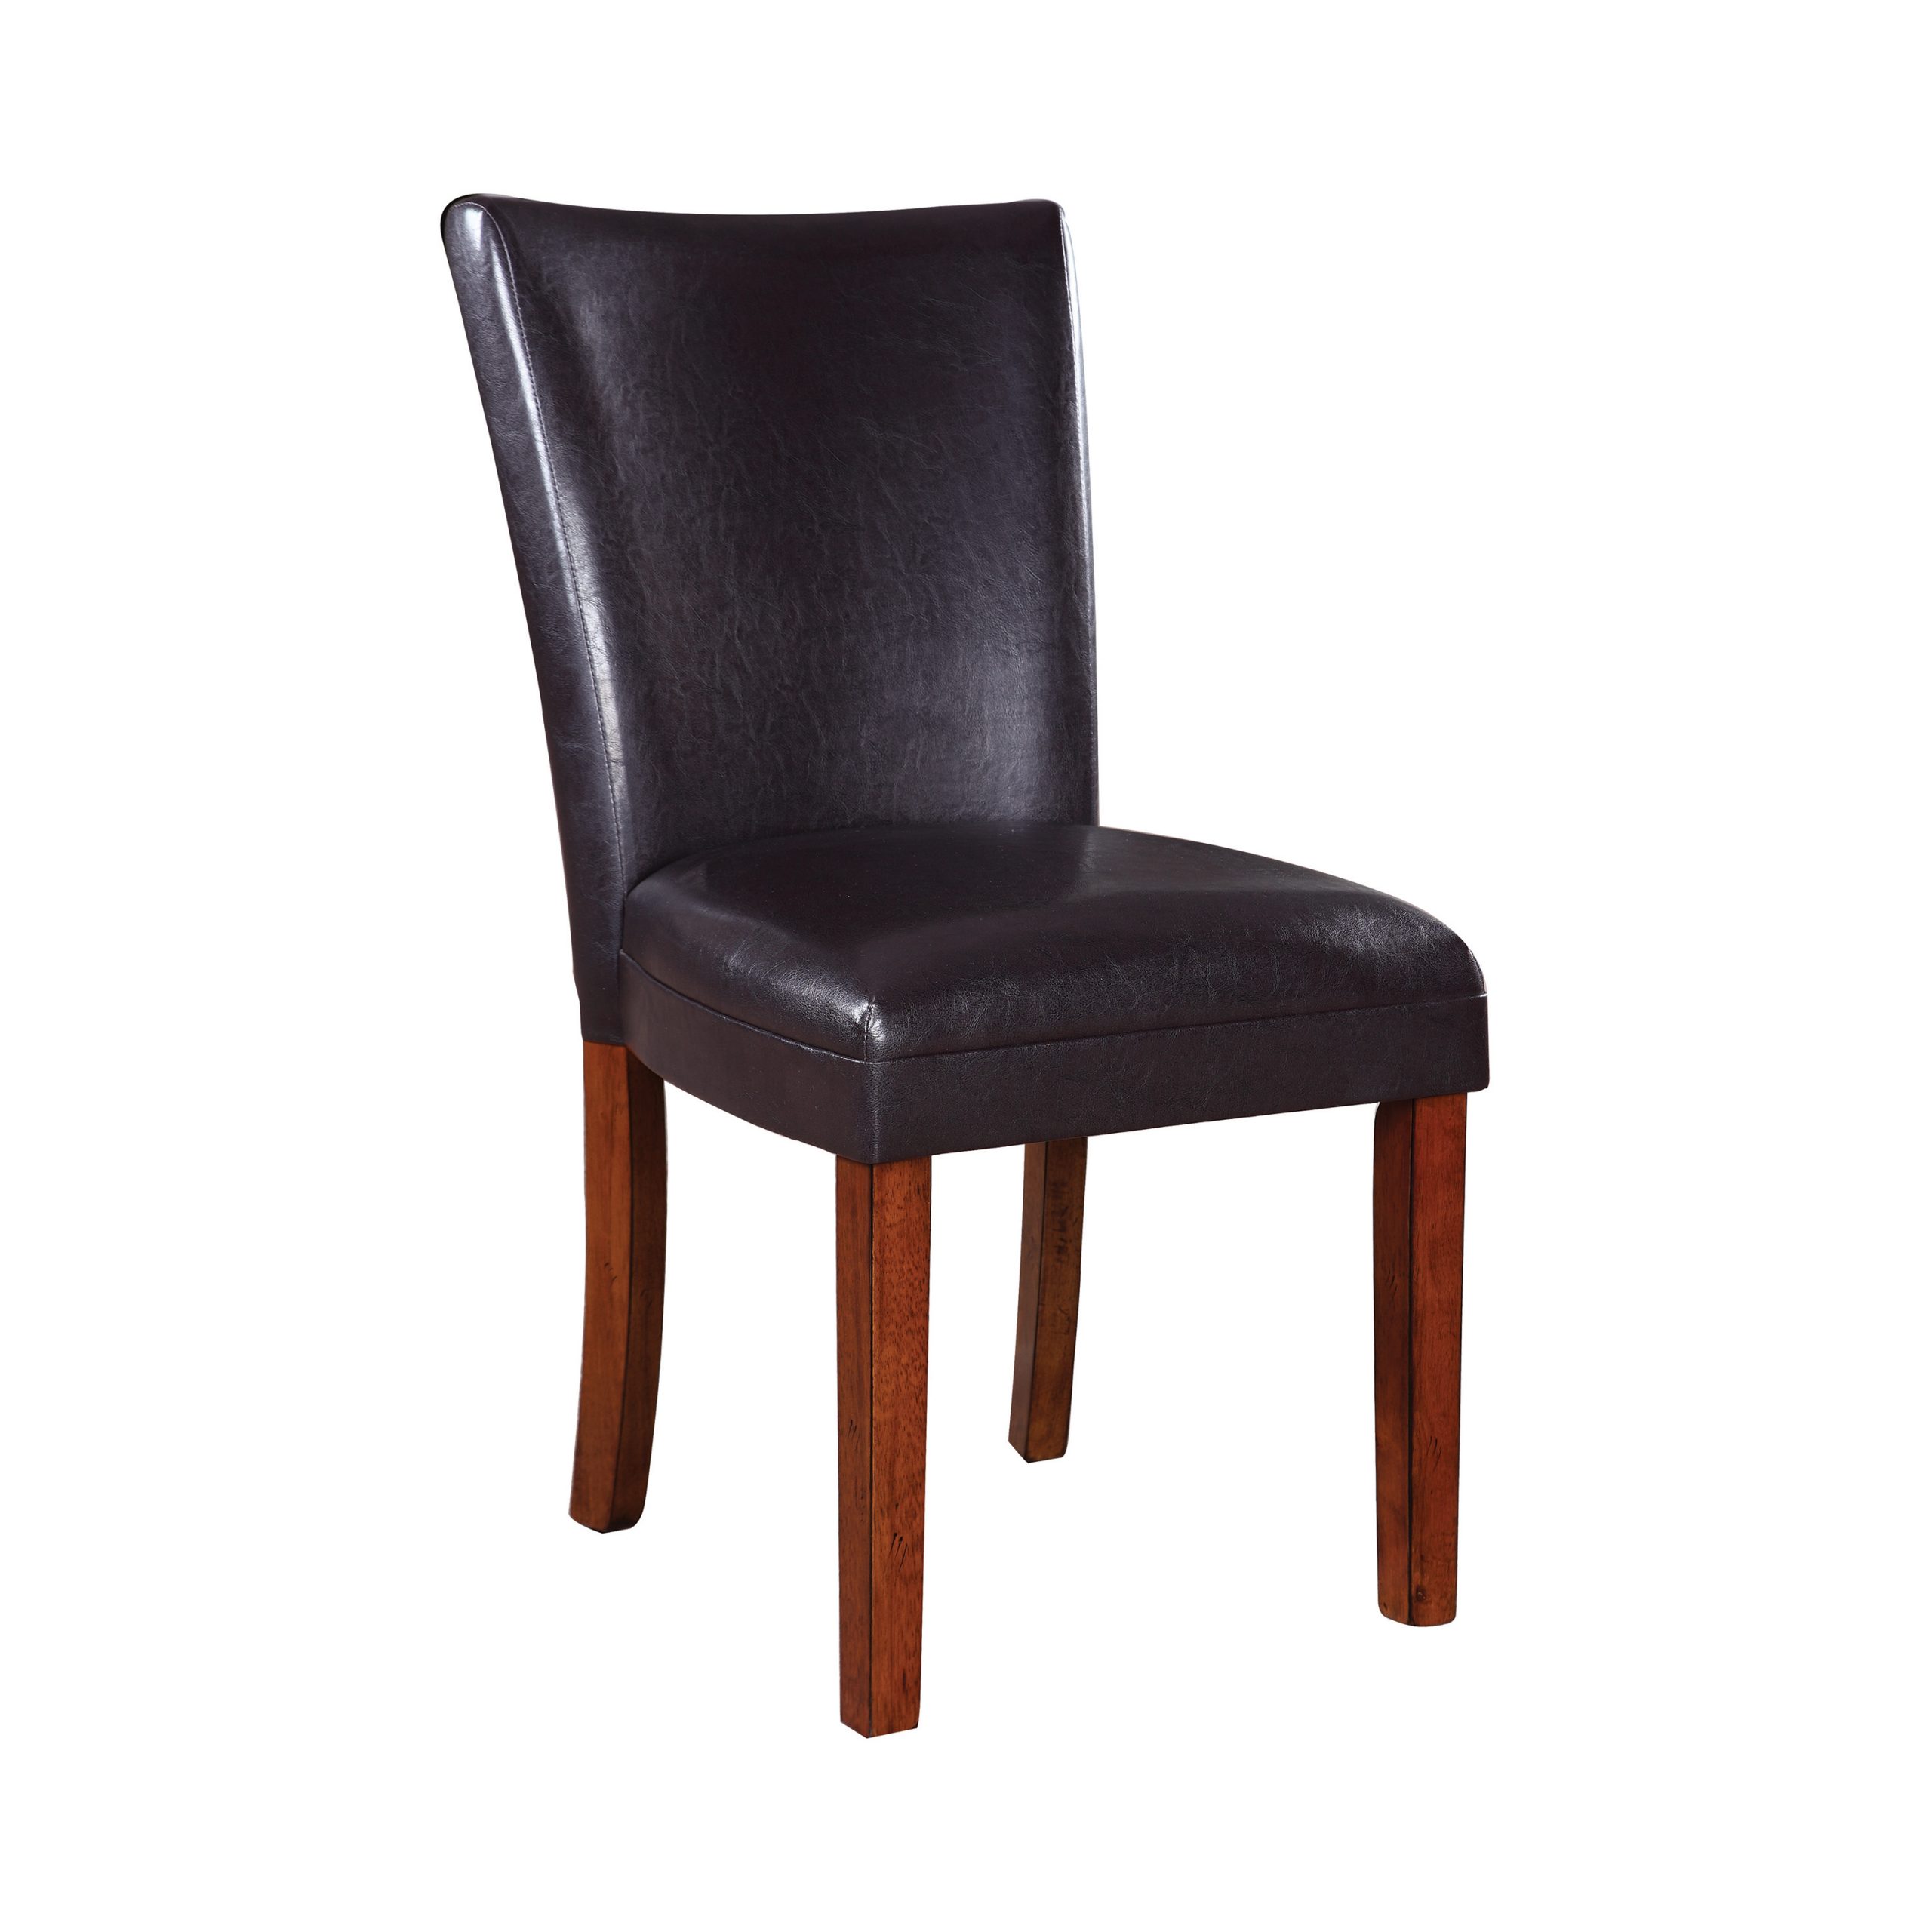 MALL - SIDE CHAIR - NorCalFurniture